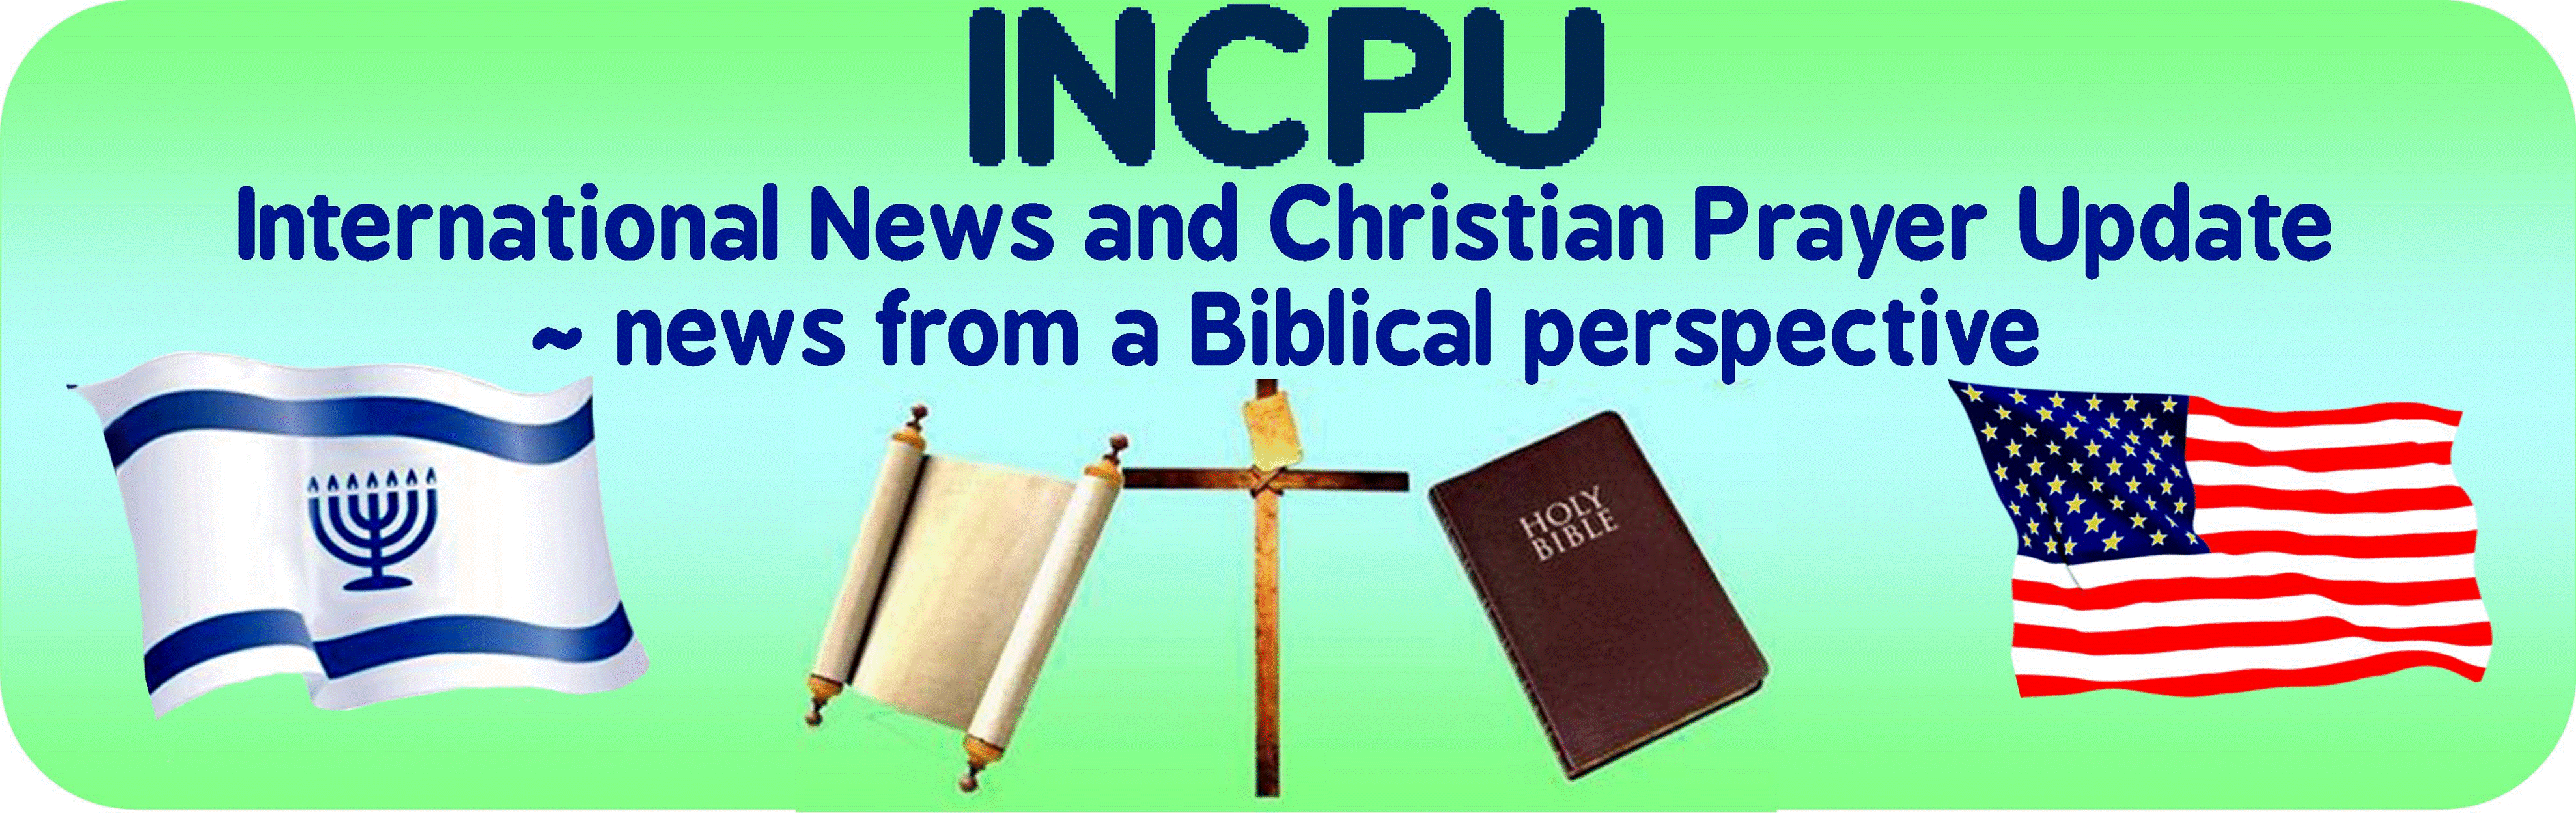 updated-INCPU-banner.png